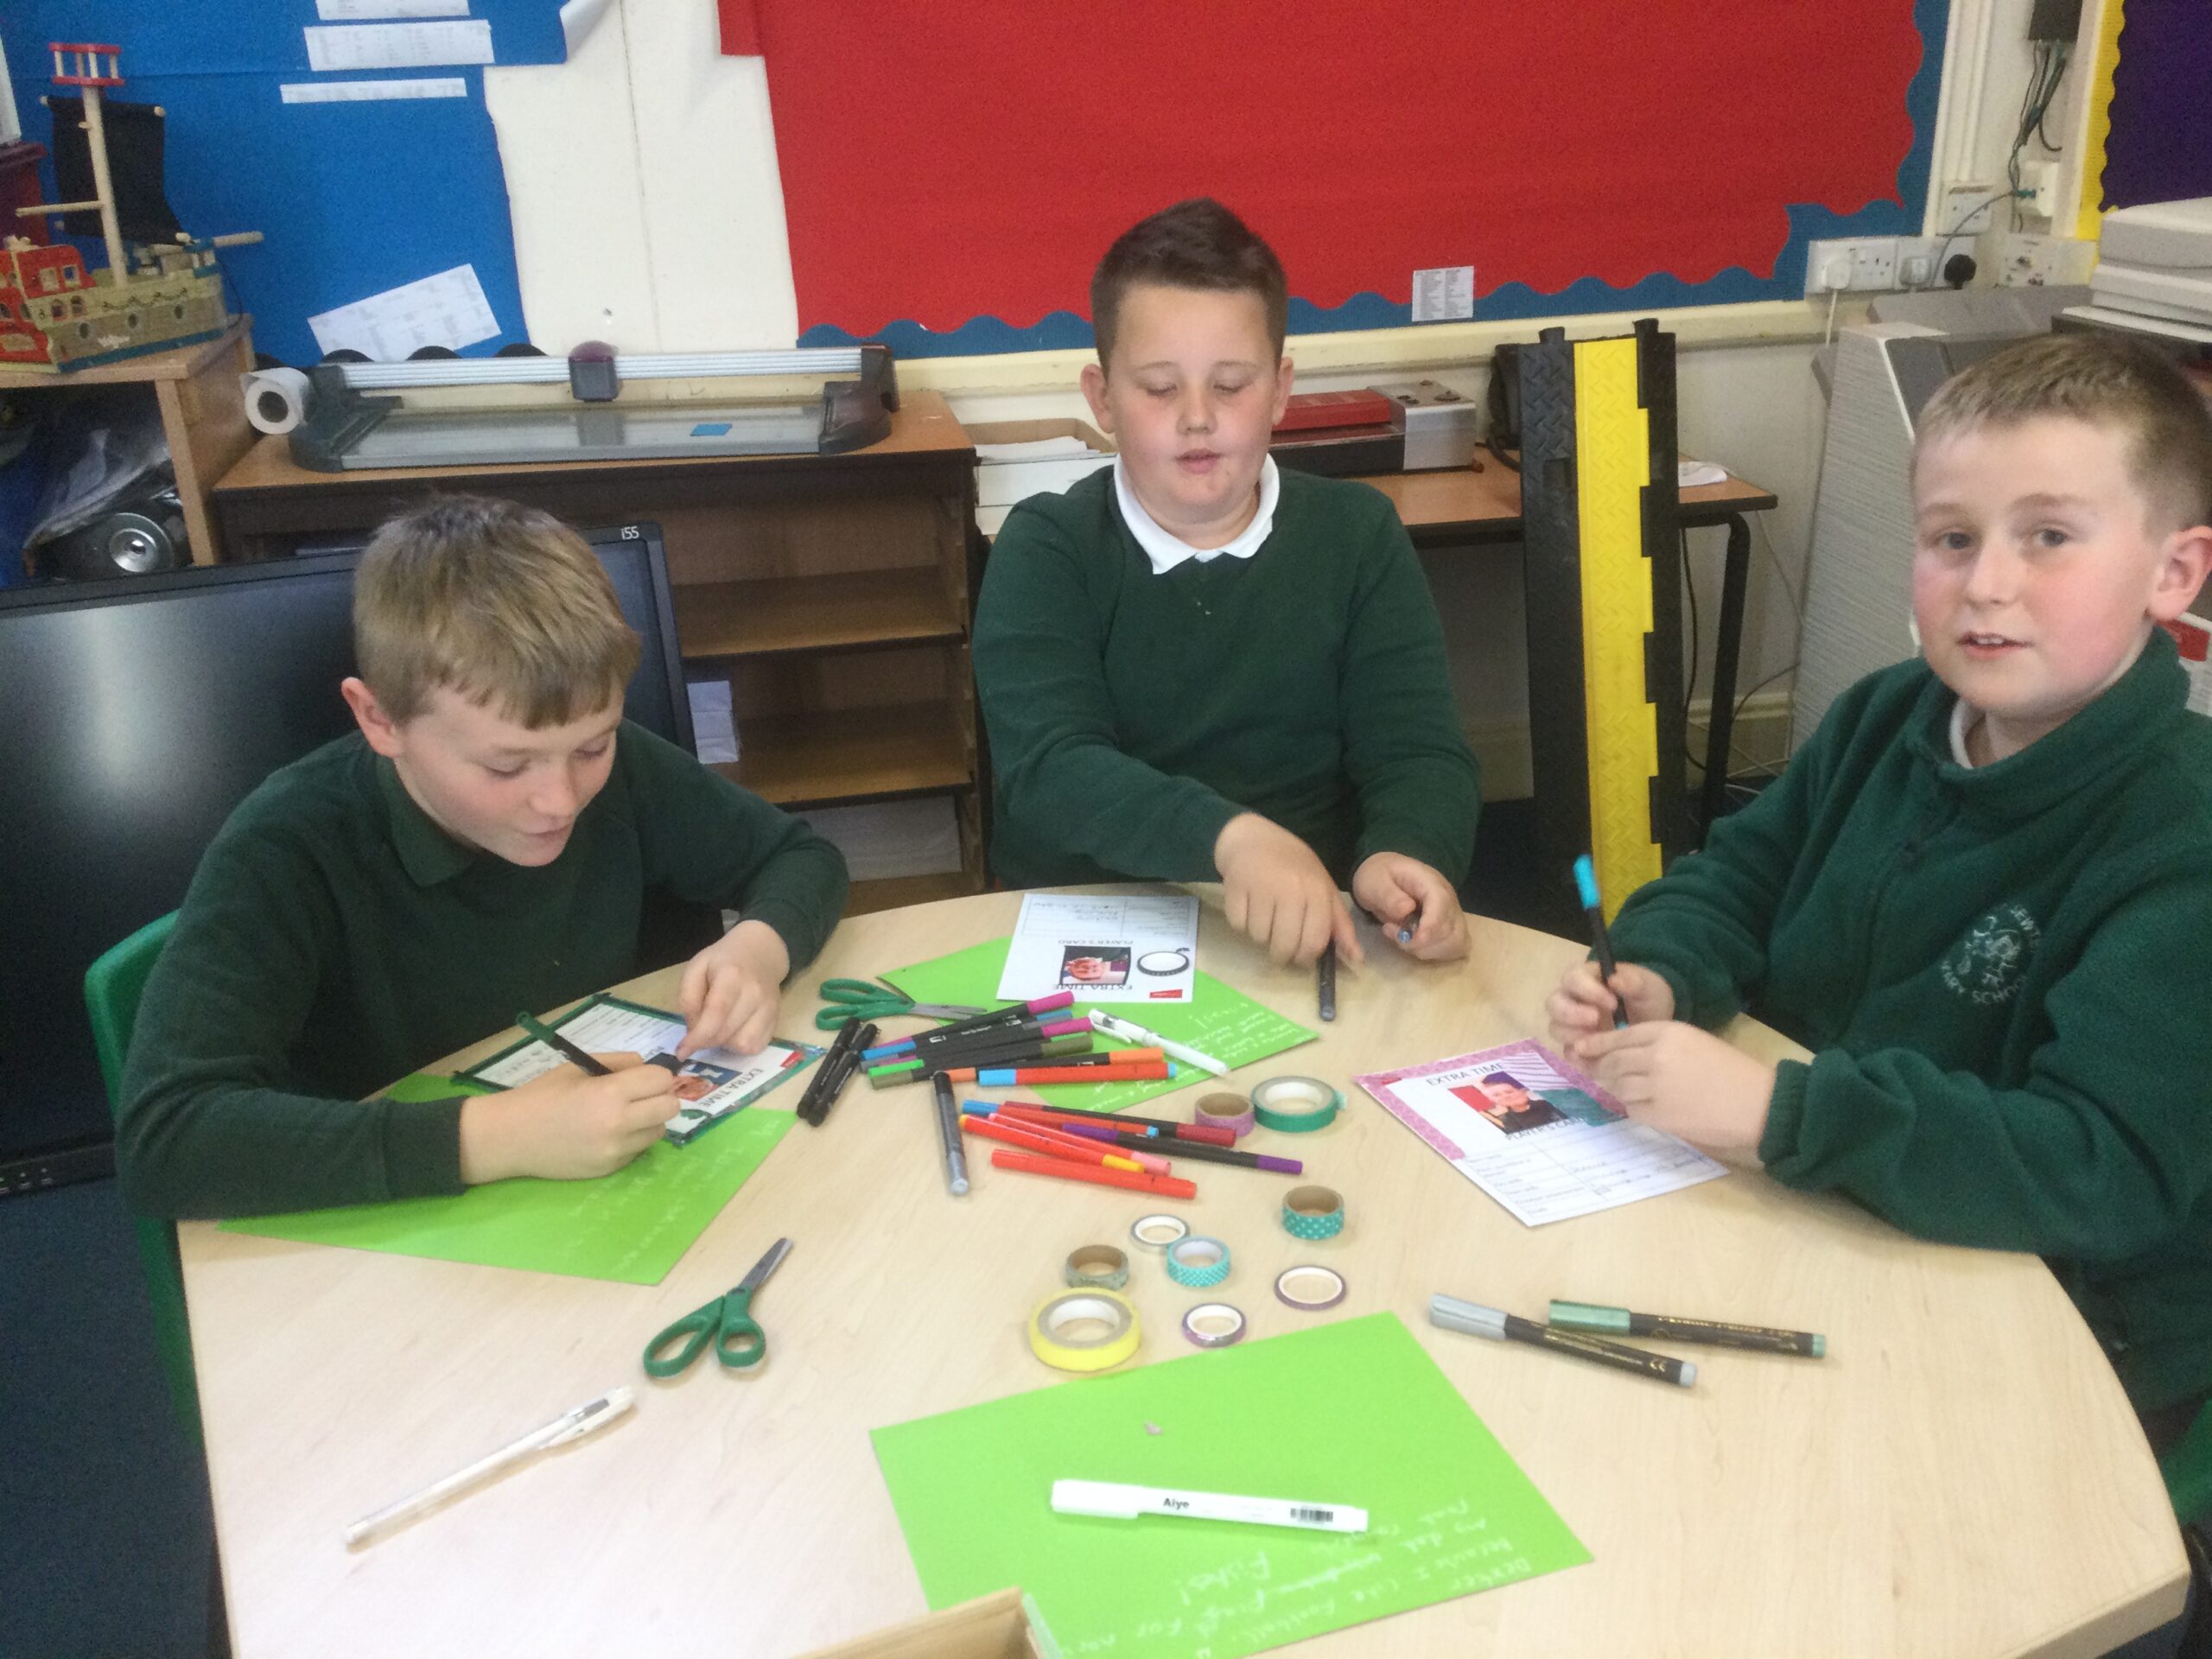 Three school boys in green jerseys decorating cards with coloured pens and tape